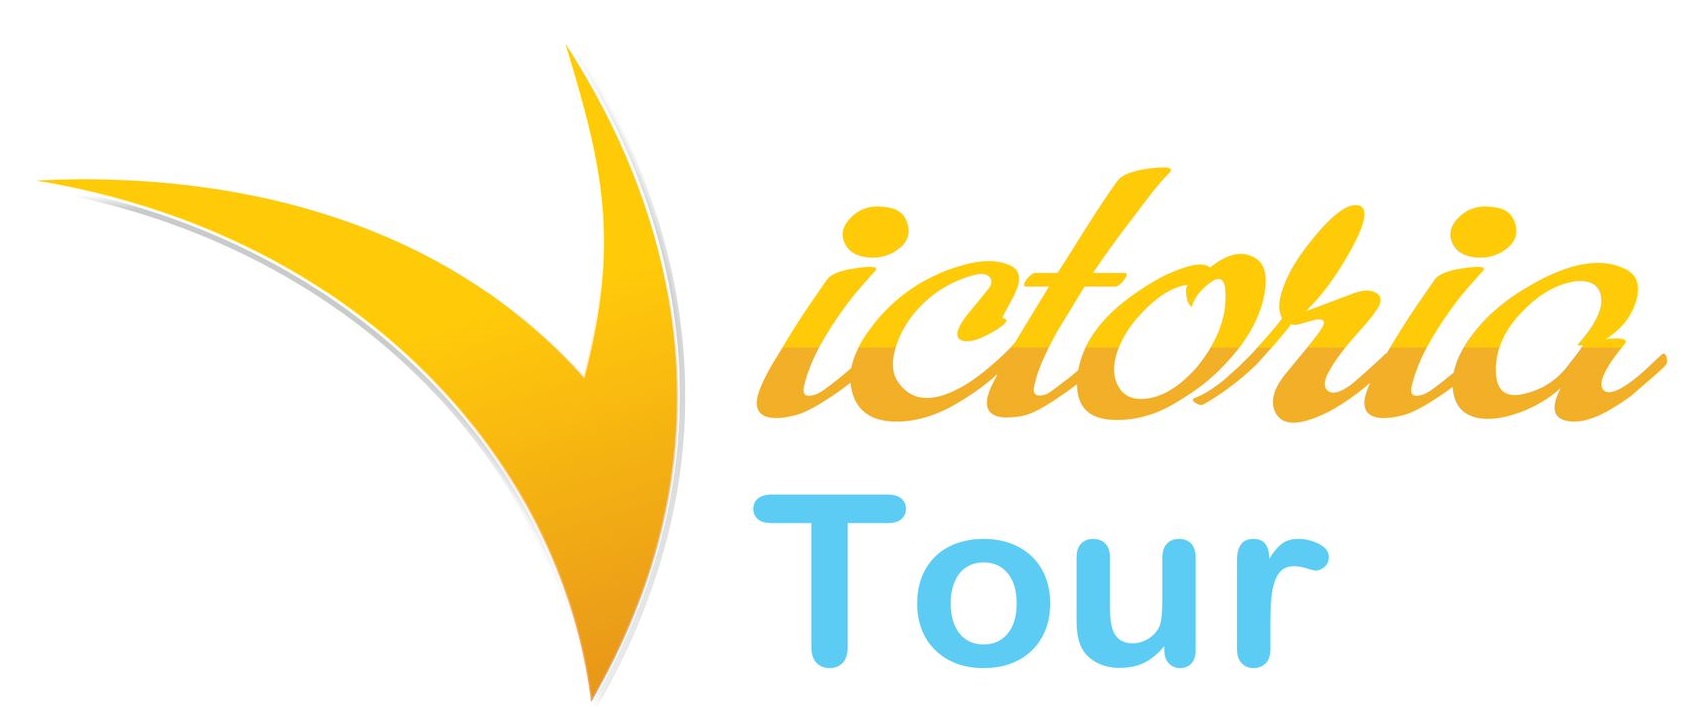 Victoriatour – Discover the wonders about tour, travel, booking hotel